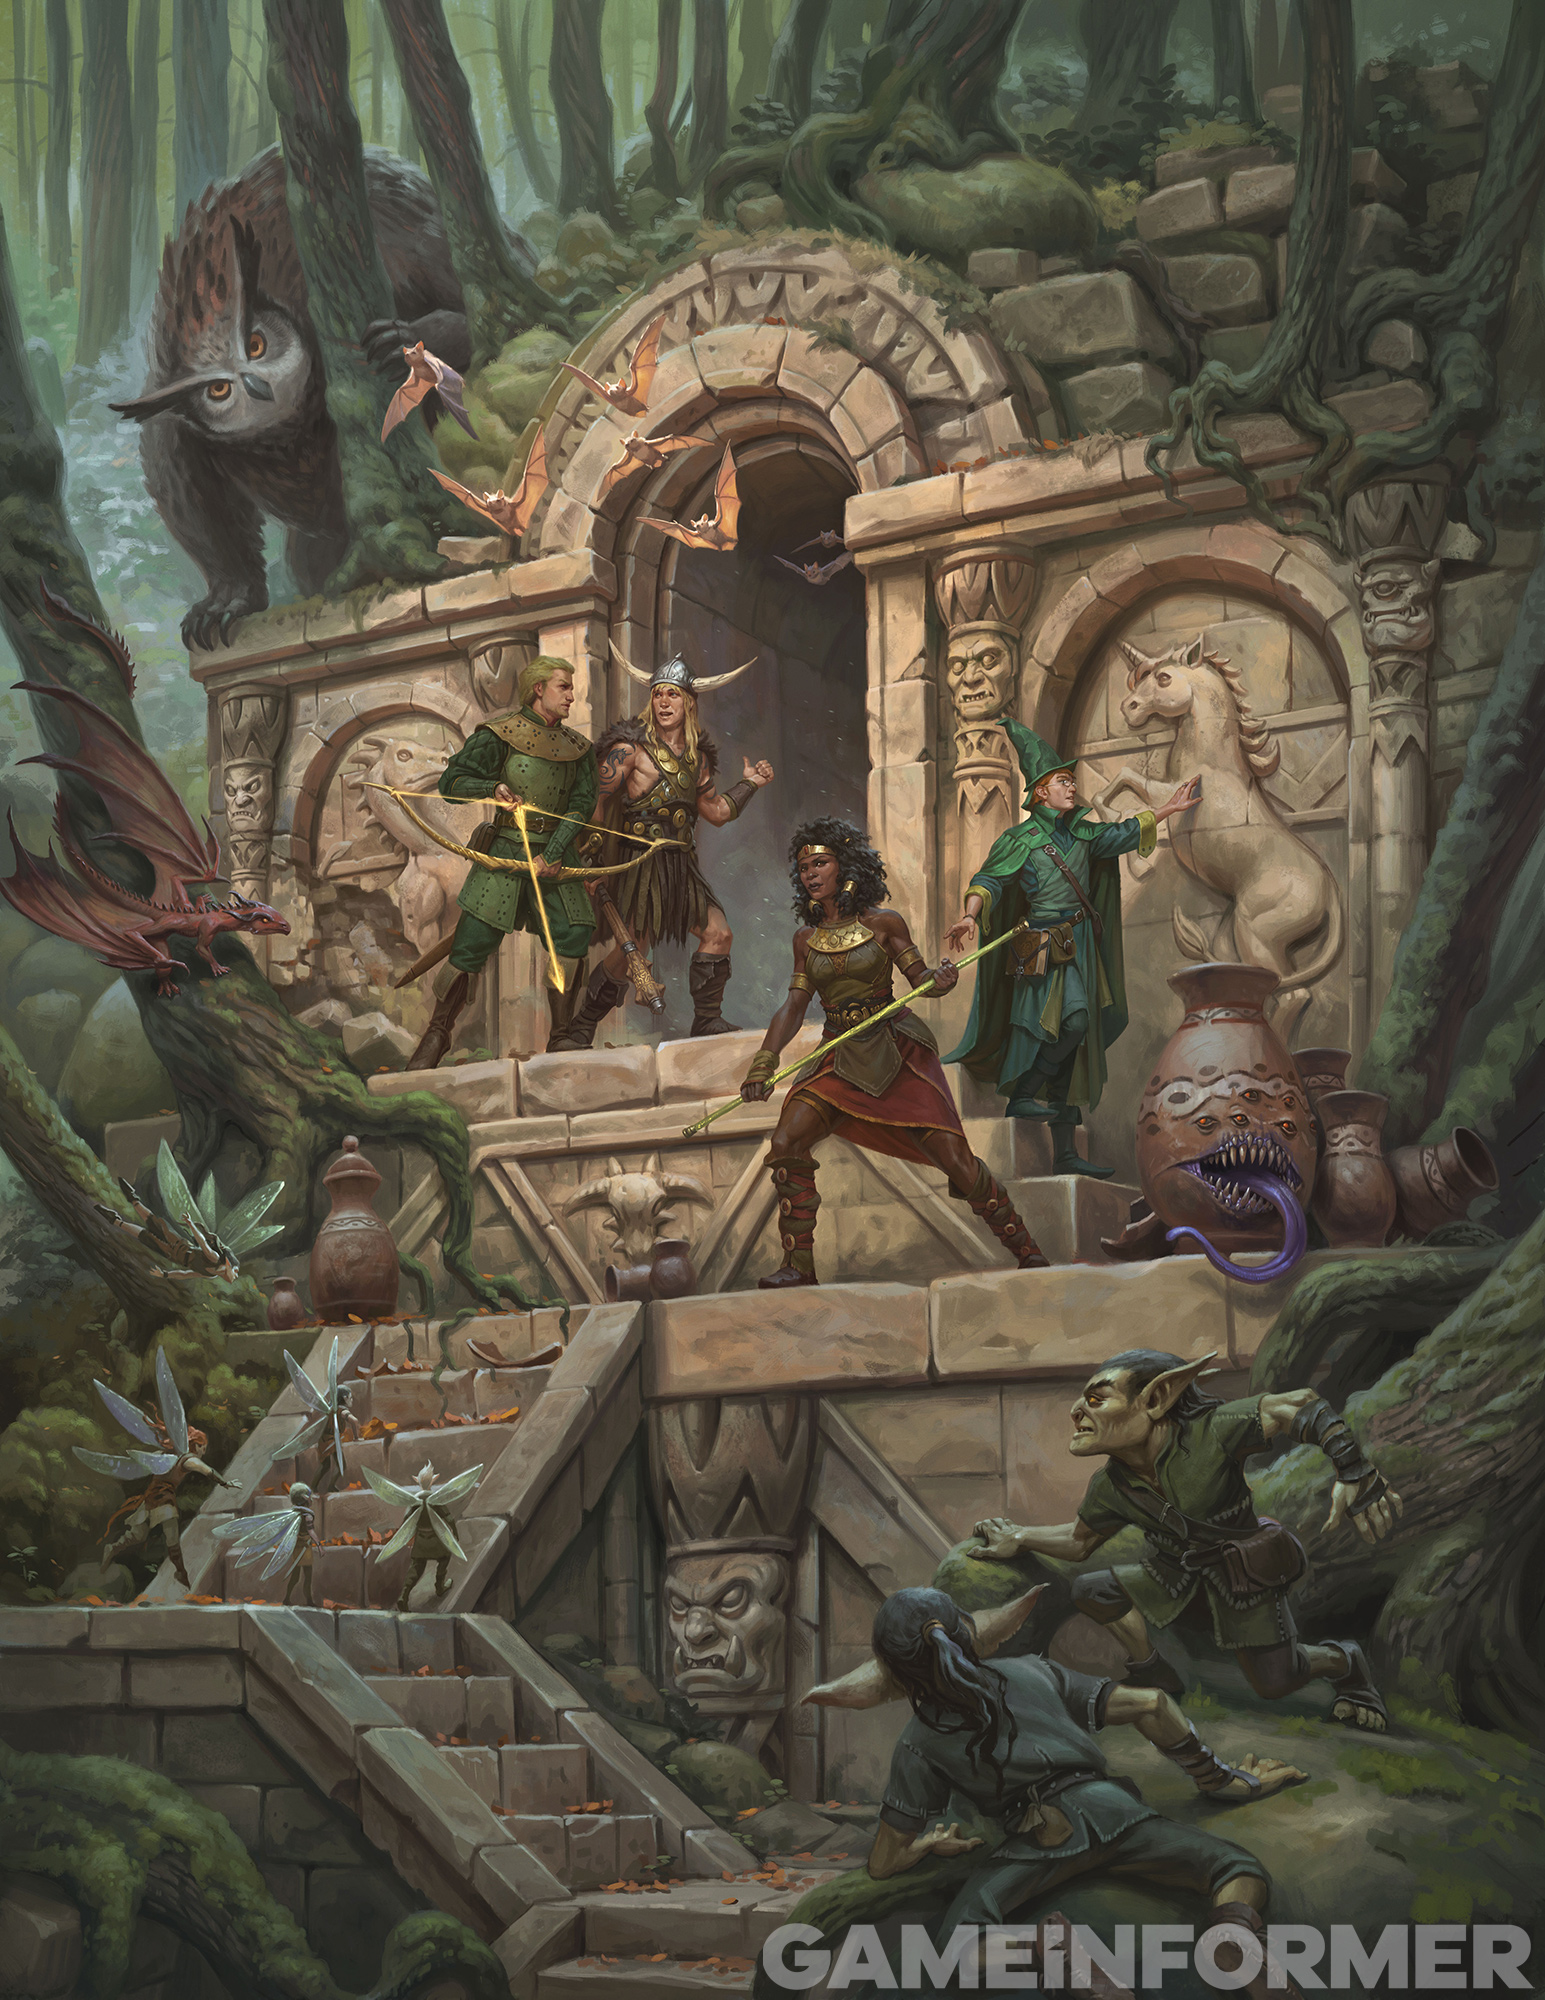 Art from the revised Dungeons & Dragons books 